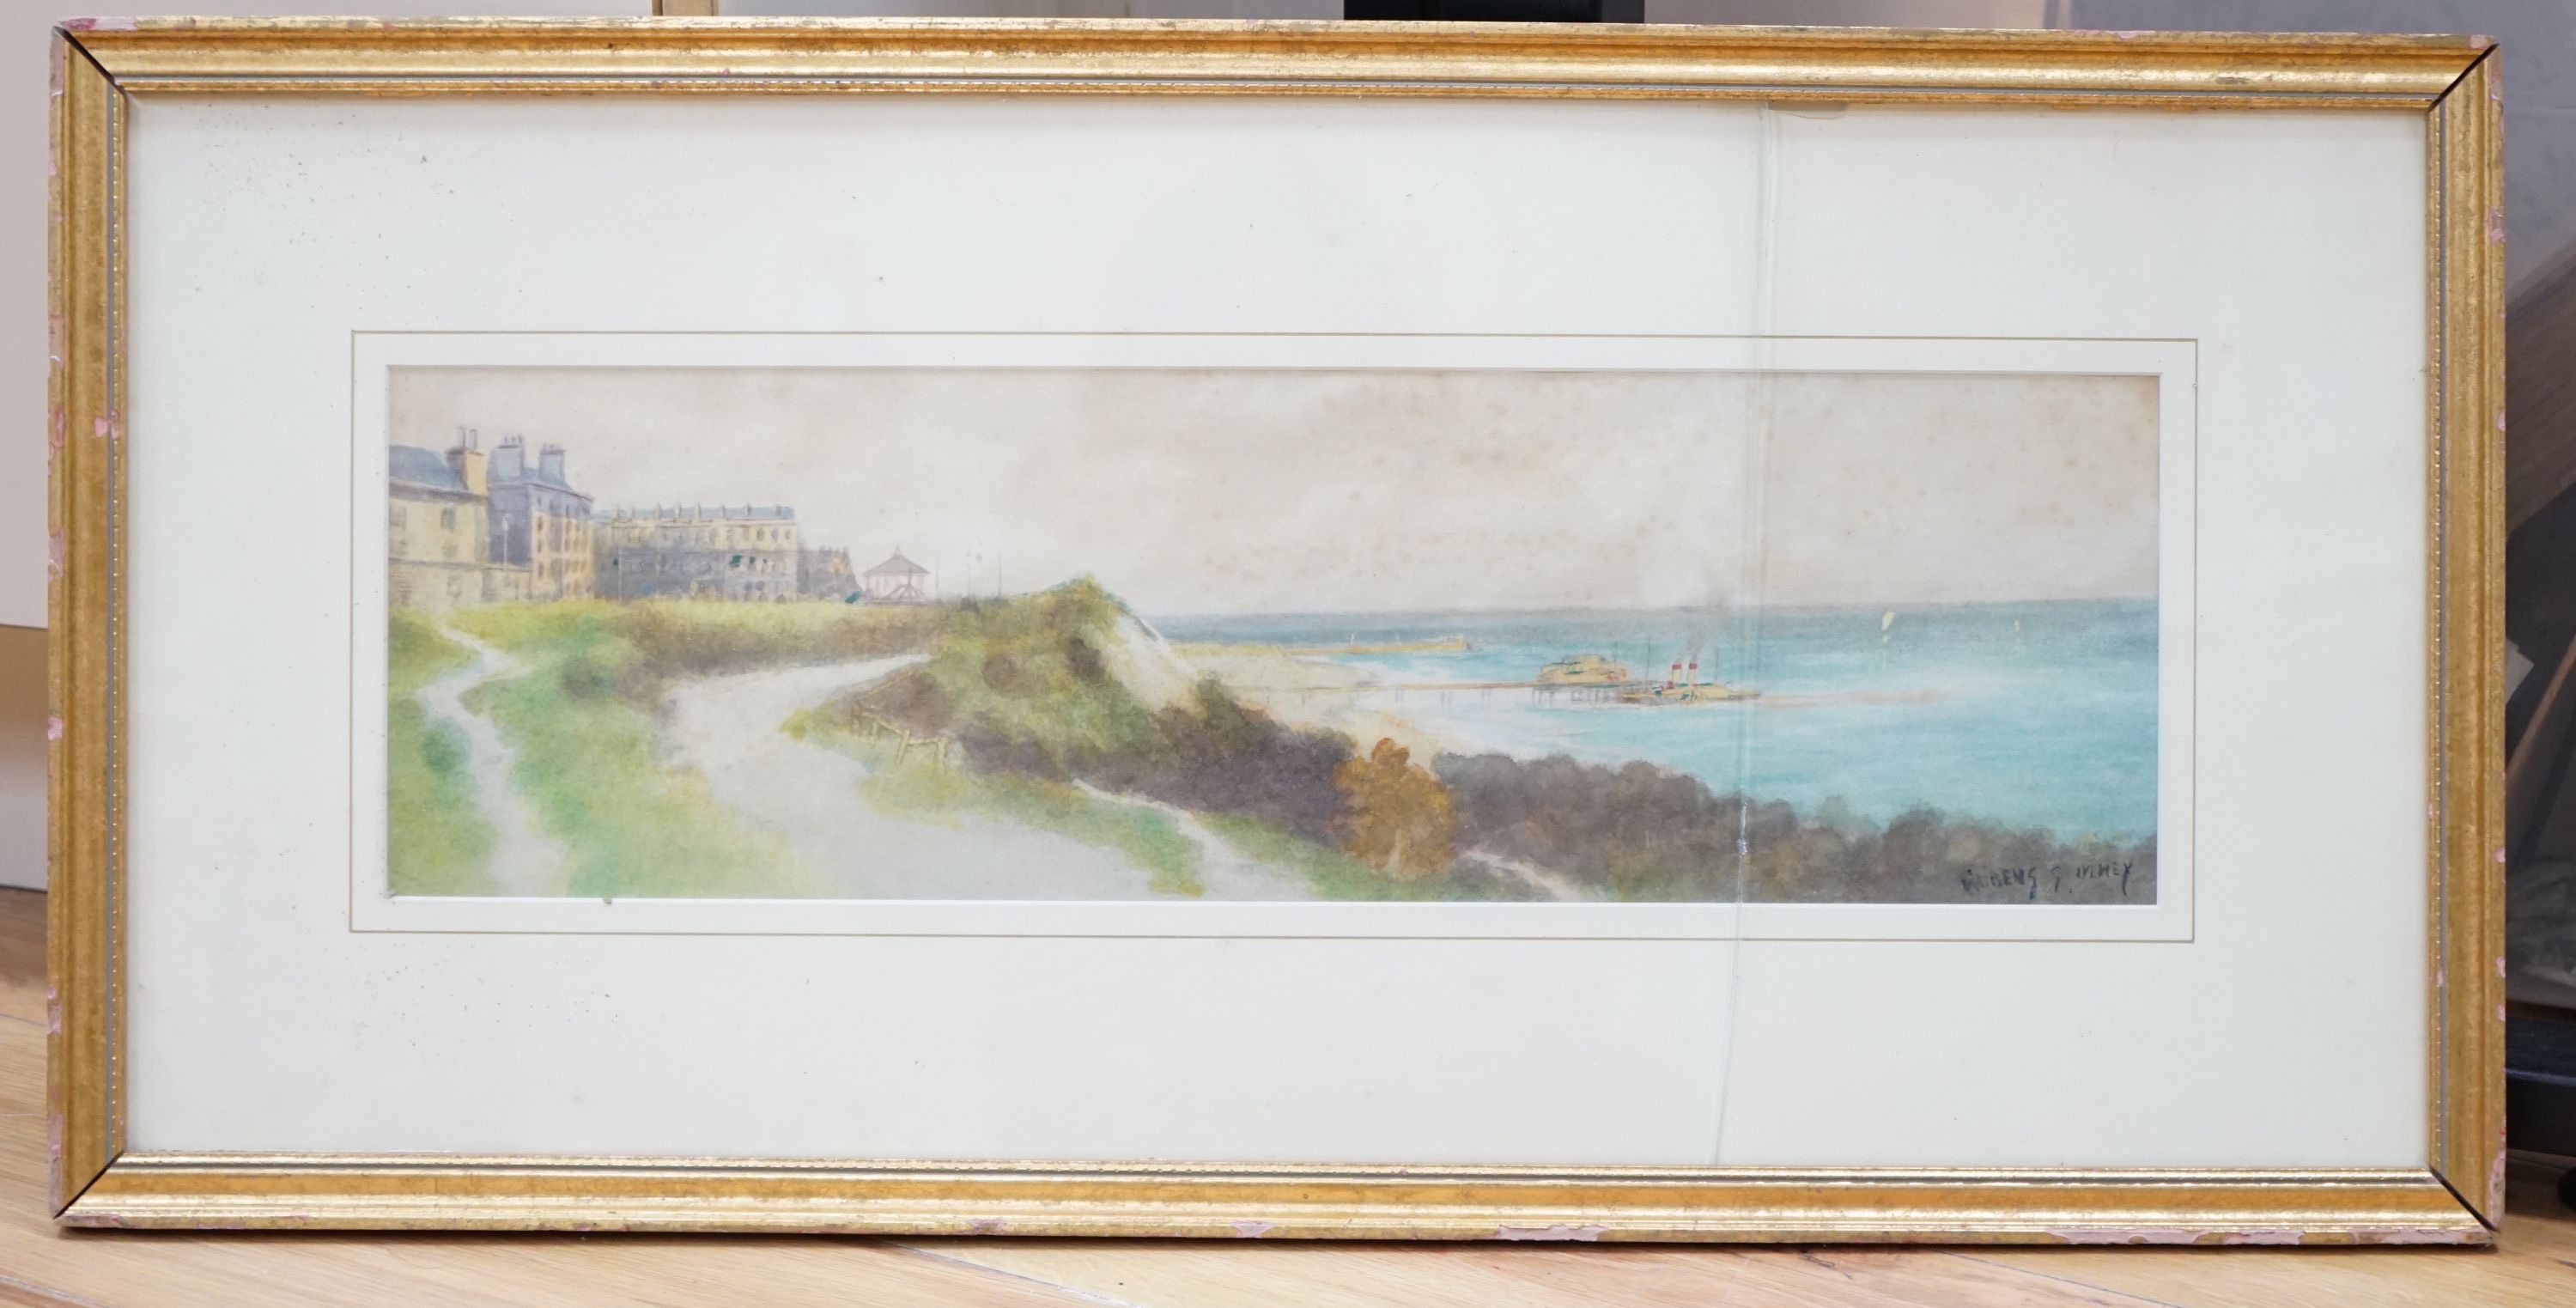 Rubens Southey (1881-1933), watercolour, Coastal town with paddle steamer beside a pier, signed, 15 x 51cm